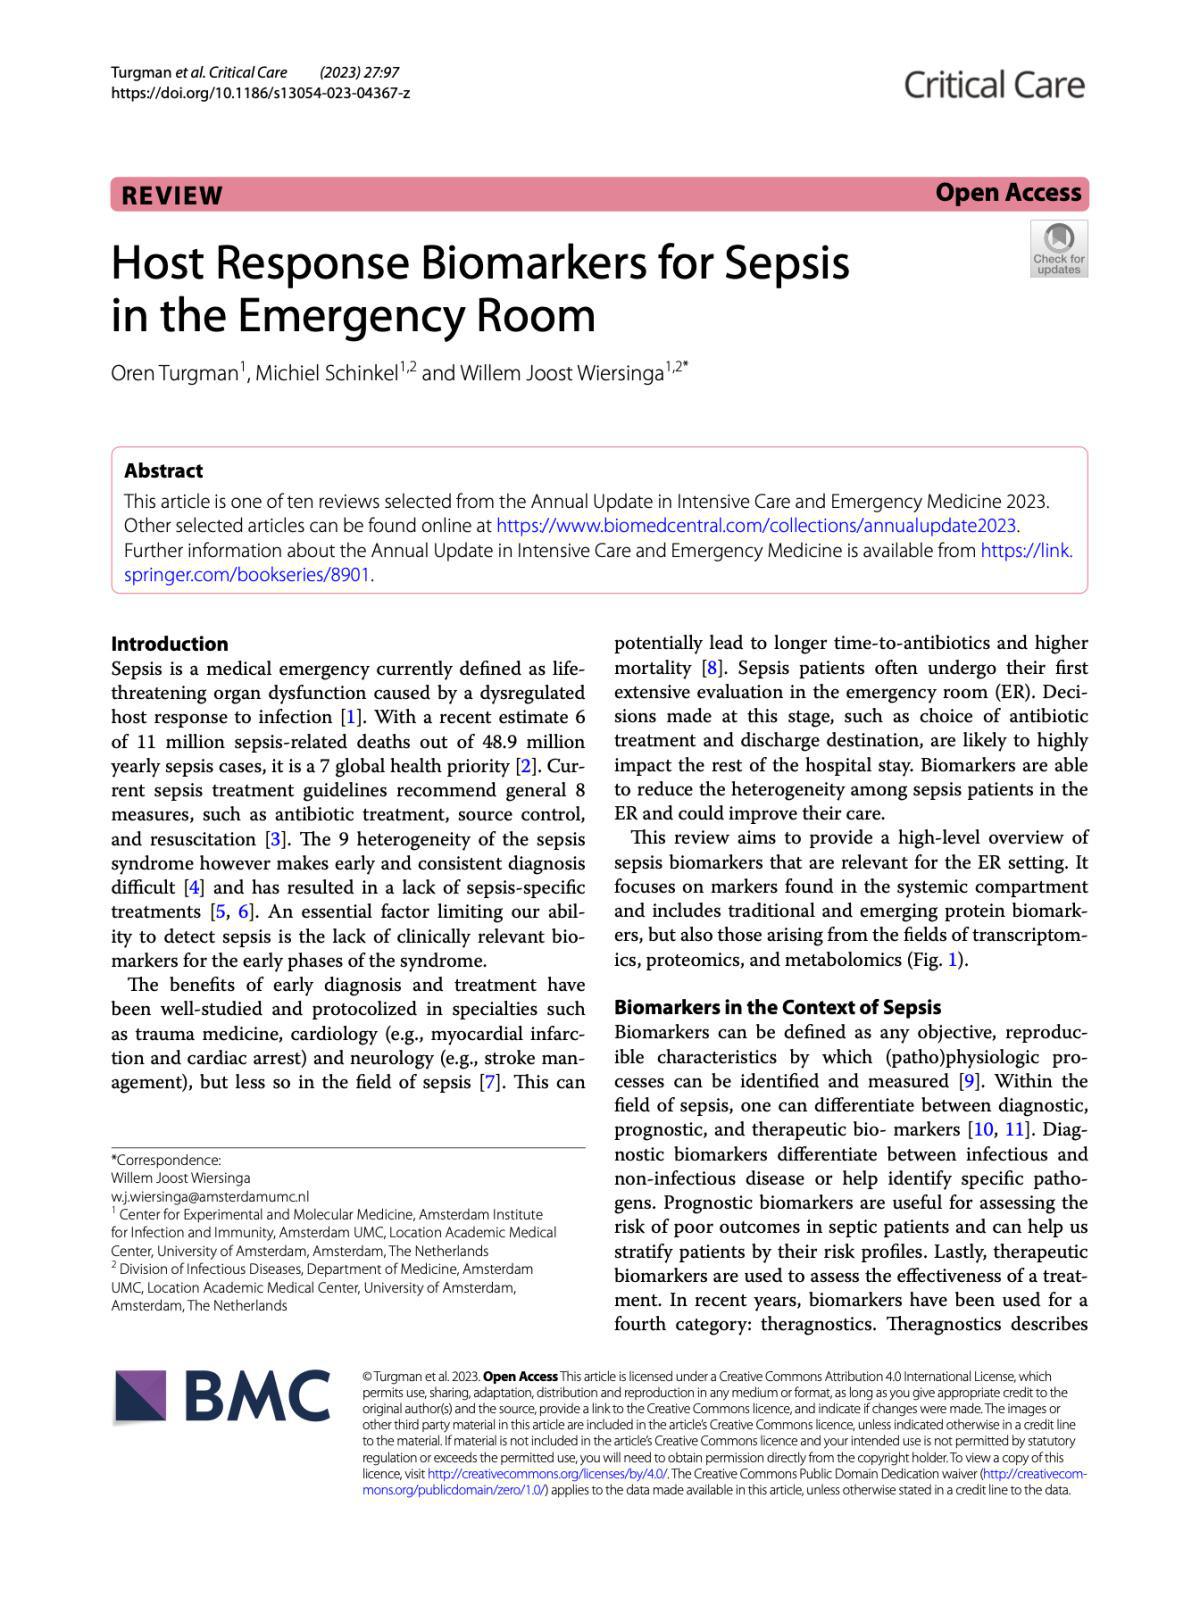 Host Response Biomarkers for Sepsis in the Emergency Room